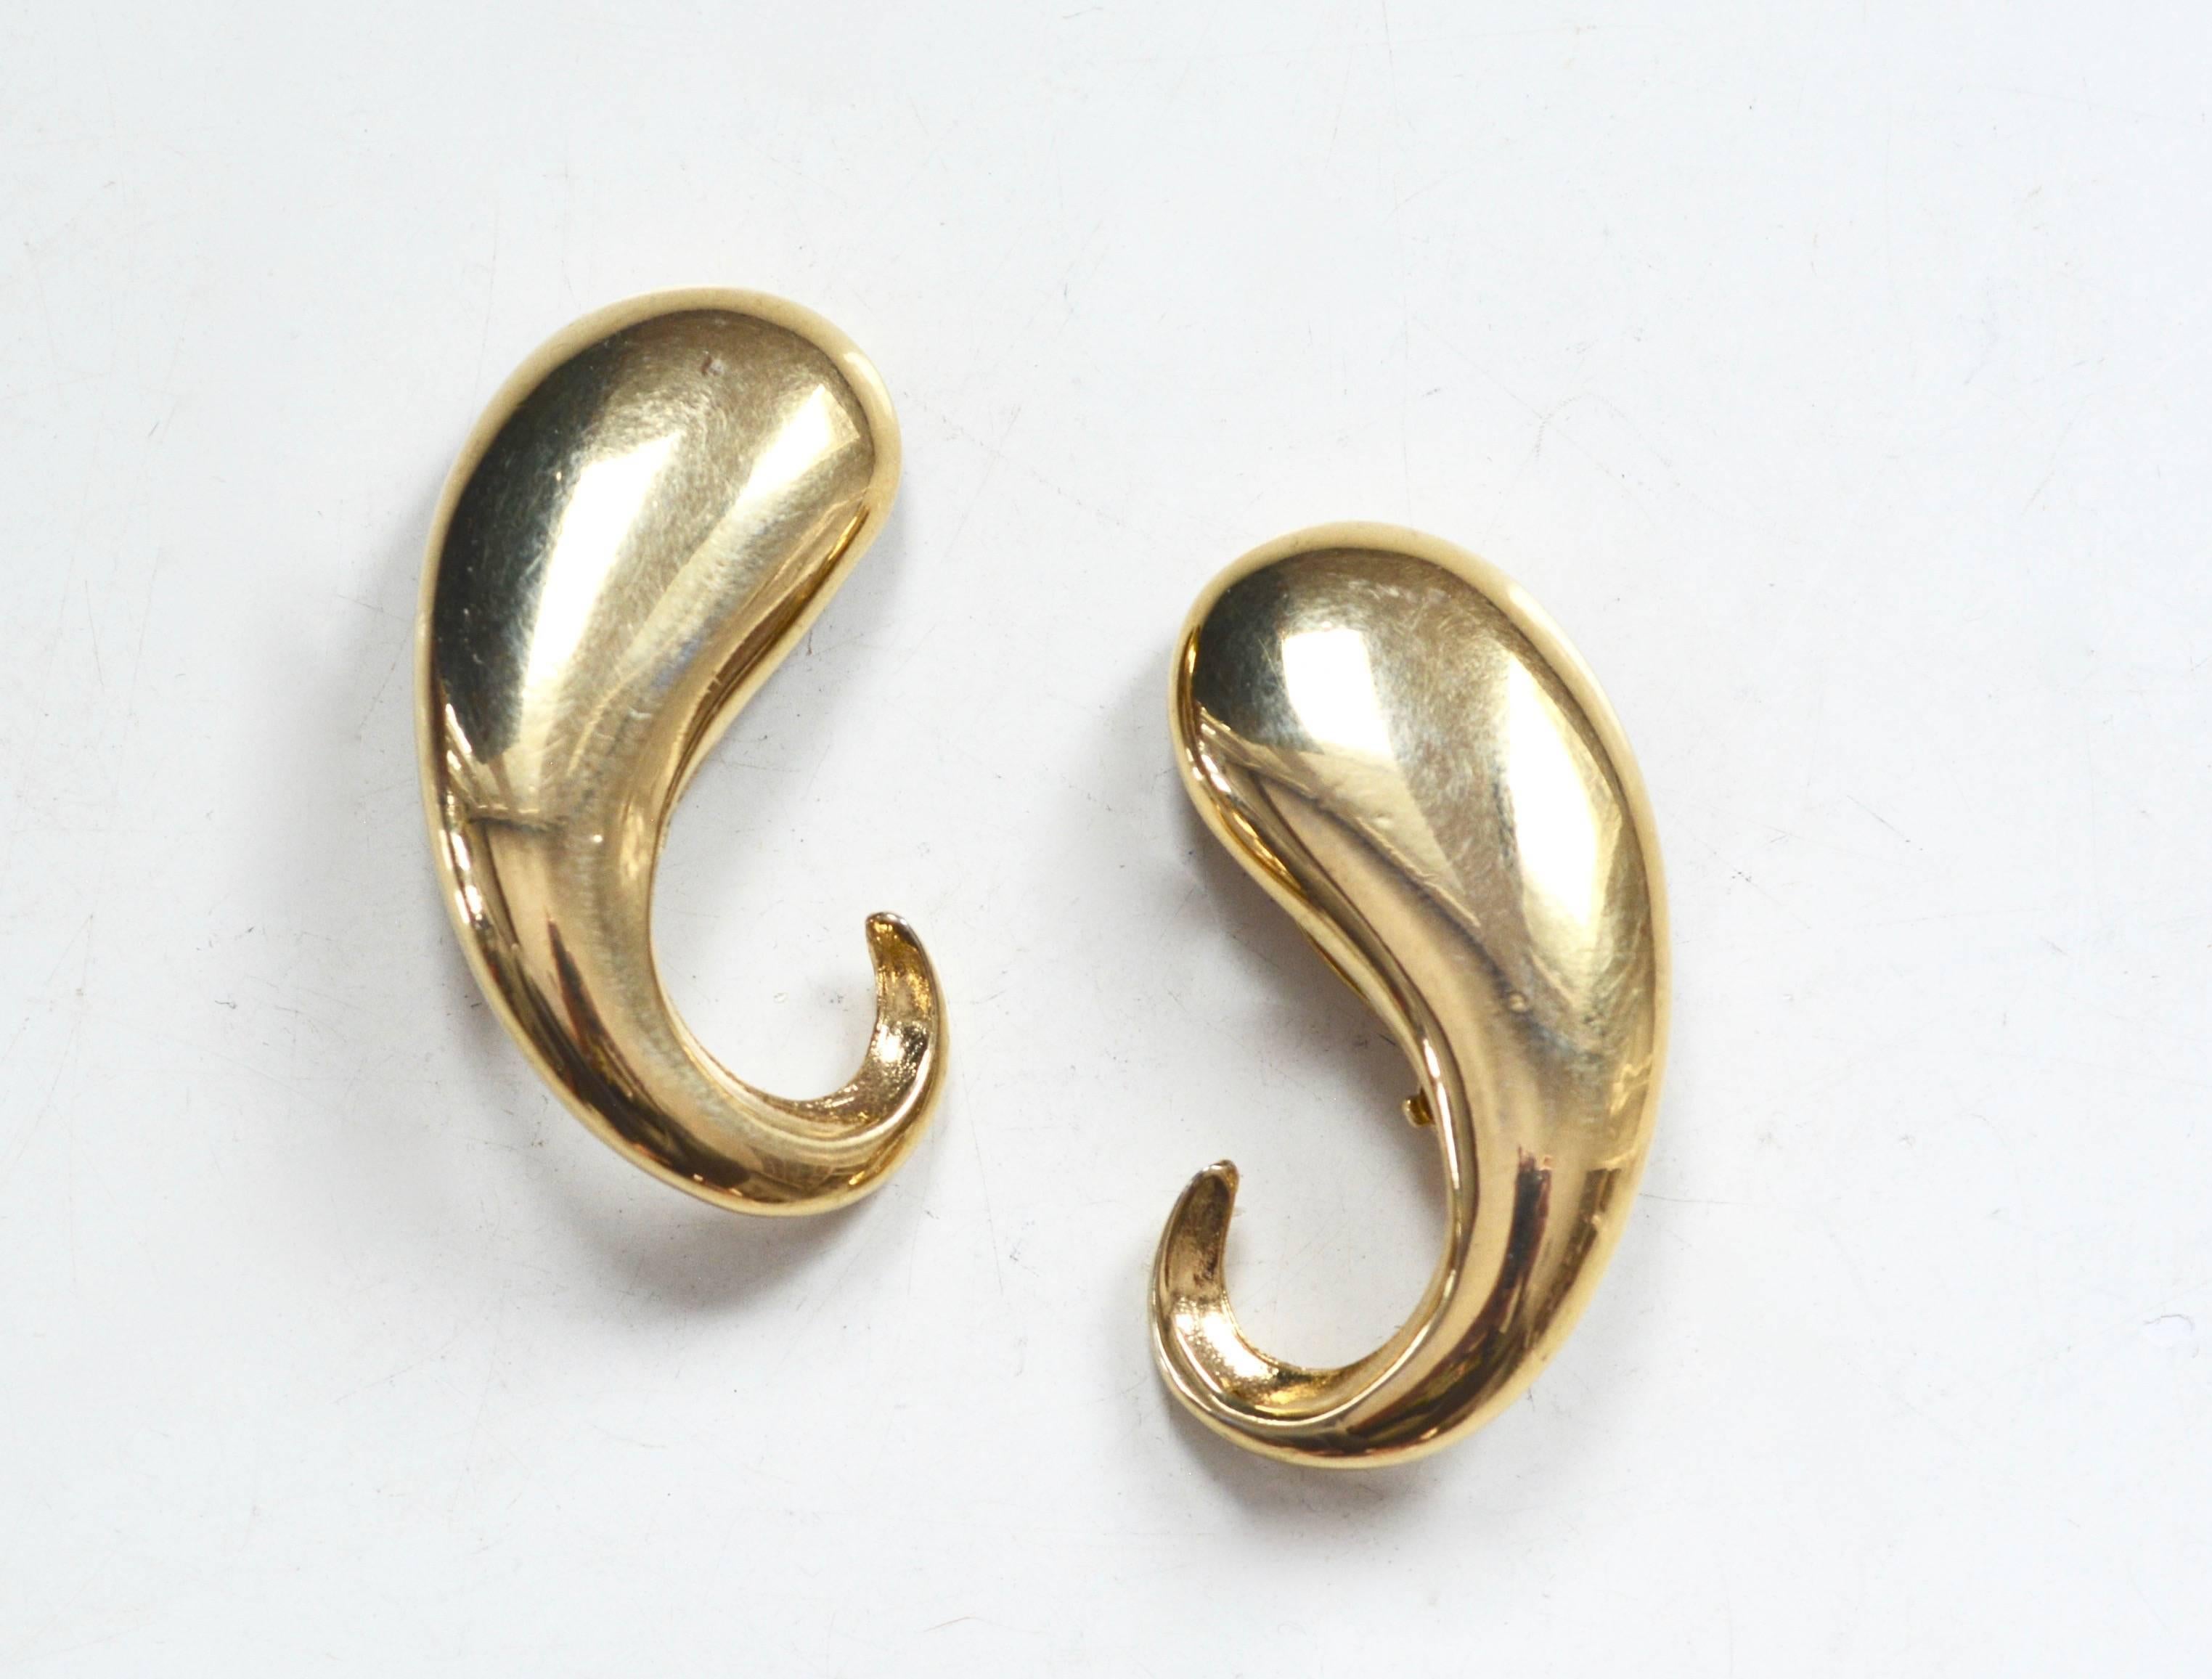 Signed Givenchy 1980s golden modern abstract swirl earrings. They have a bit of the punk reference to them, but are at the same time very chic. Nice wearable weight. 